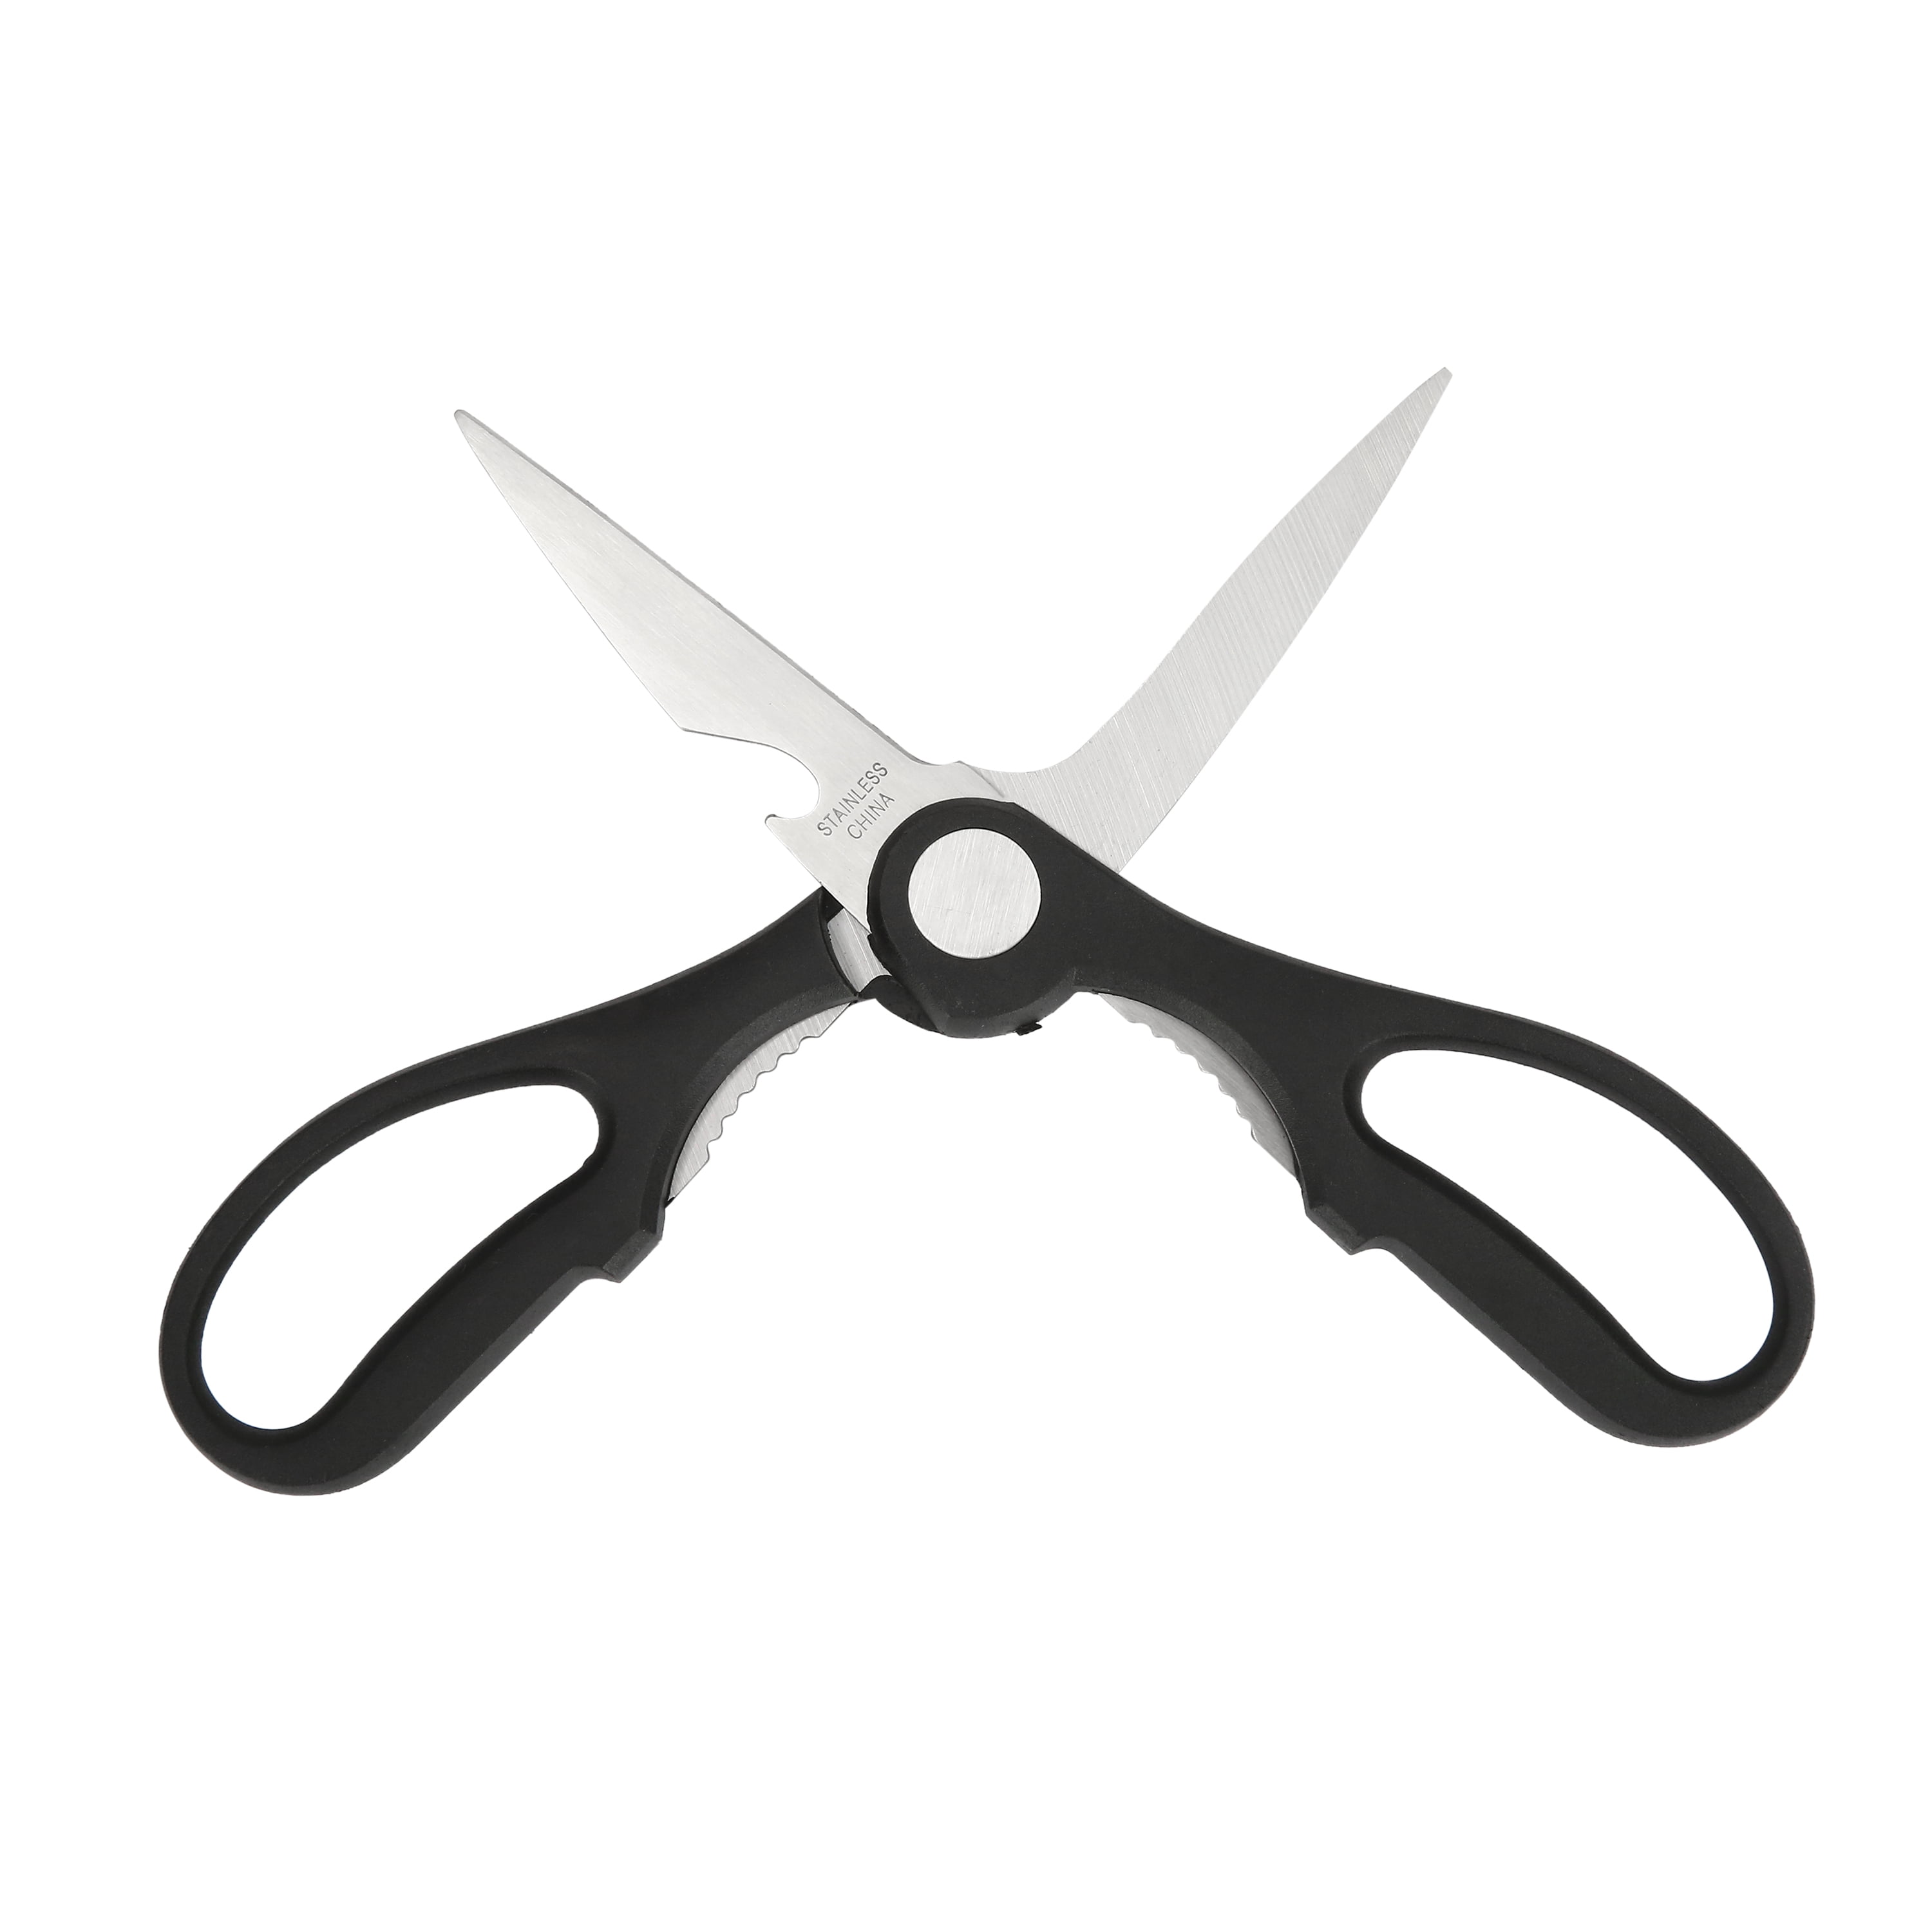  SNFSchneidteufel Kitchen Shears 8 Inch Heavy Duty  Multifunctional Kitchen Scissors with Magnetic Holder Made With German  Stainless Steel Blade and Black Ergonomic Handle : Home & Kitchen